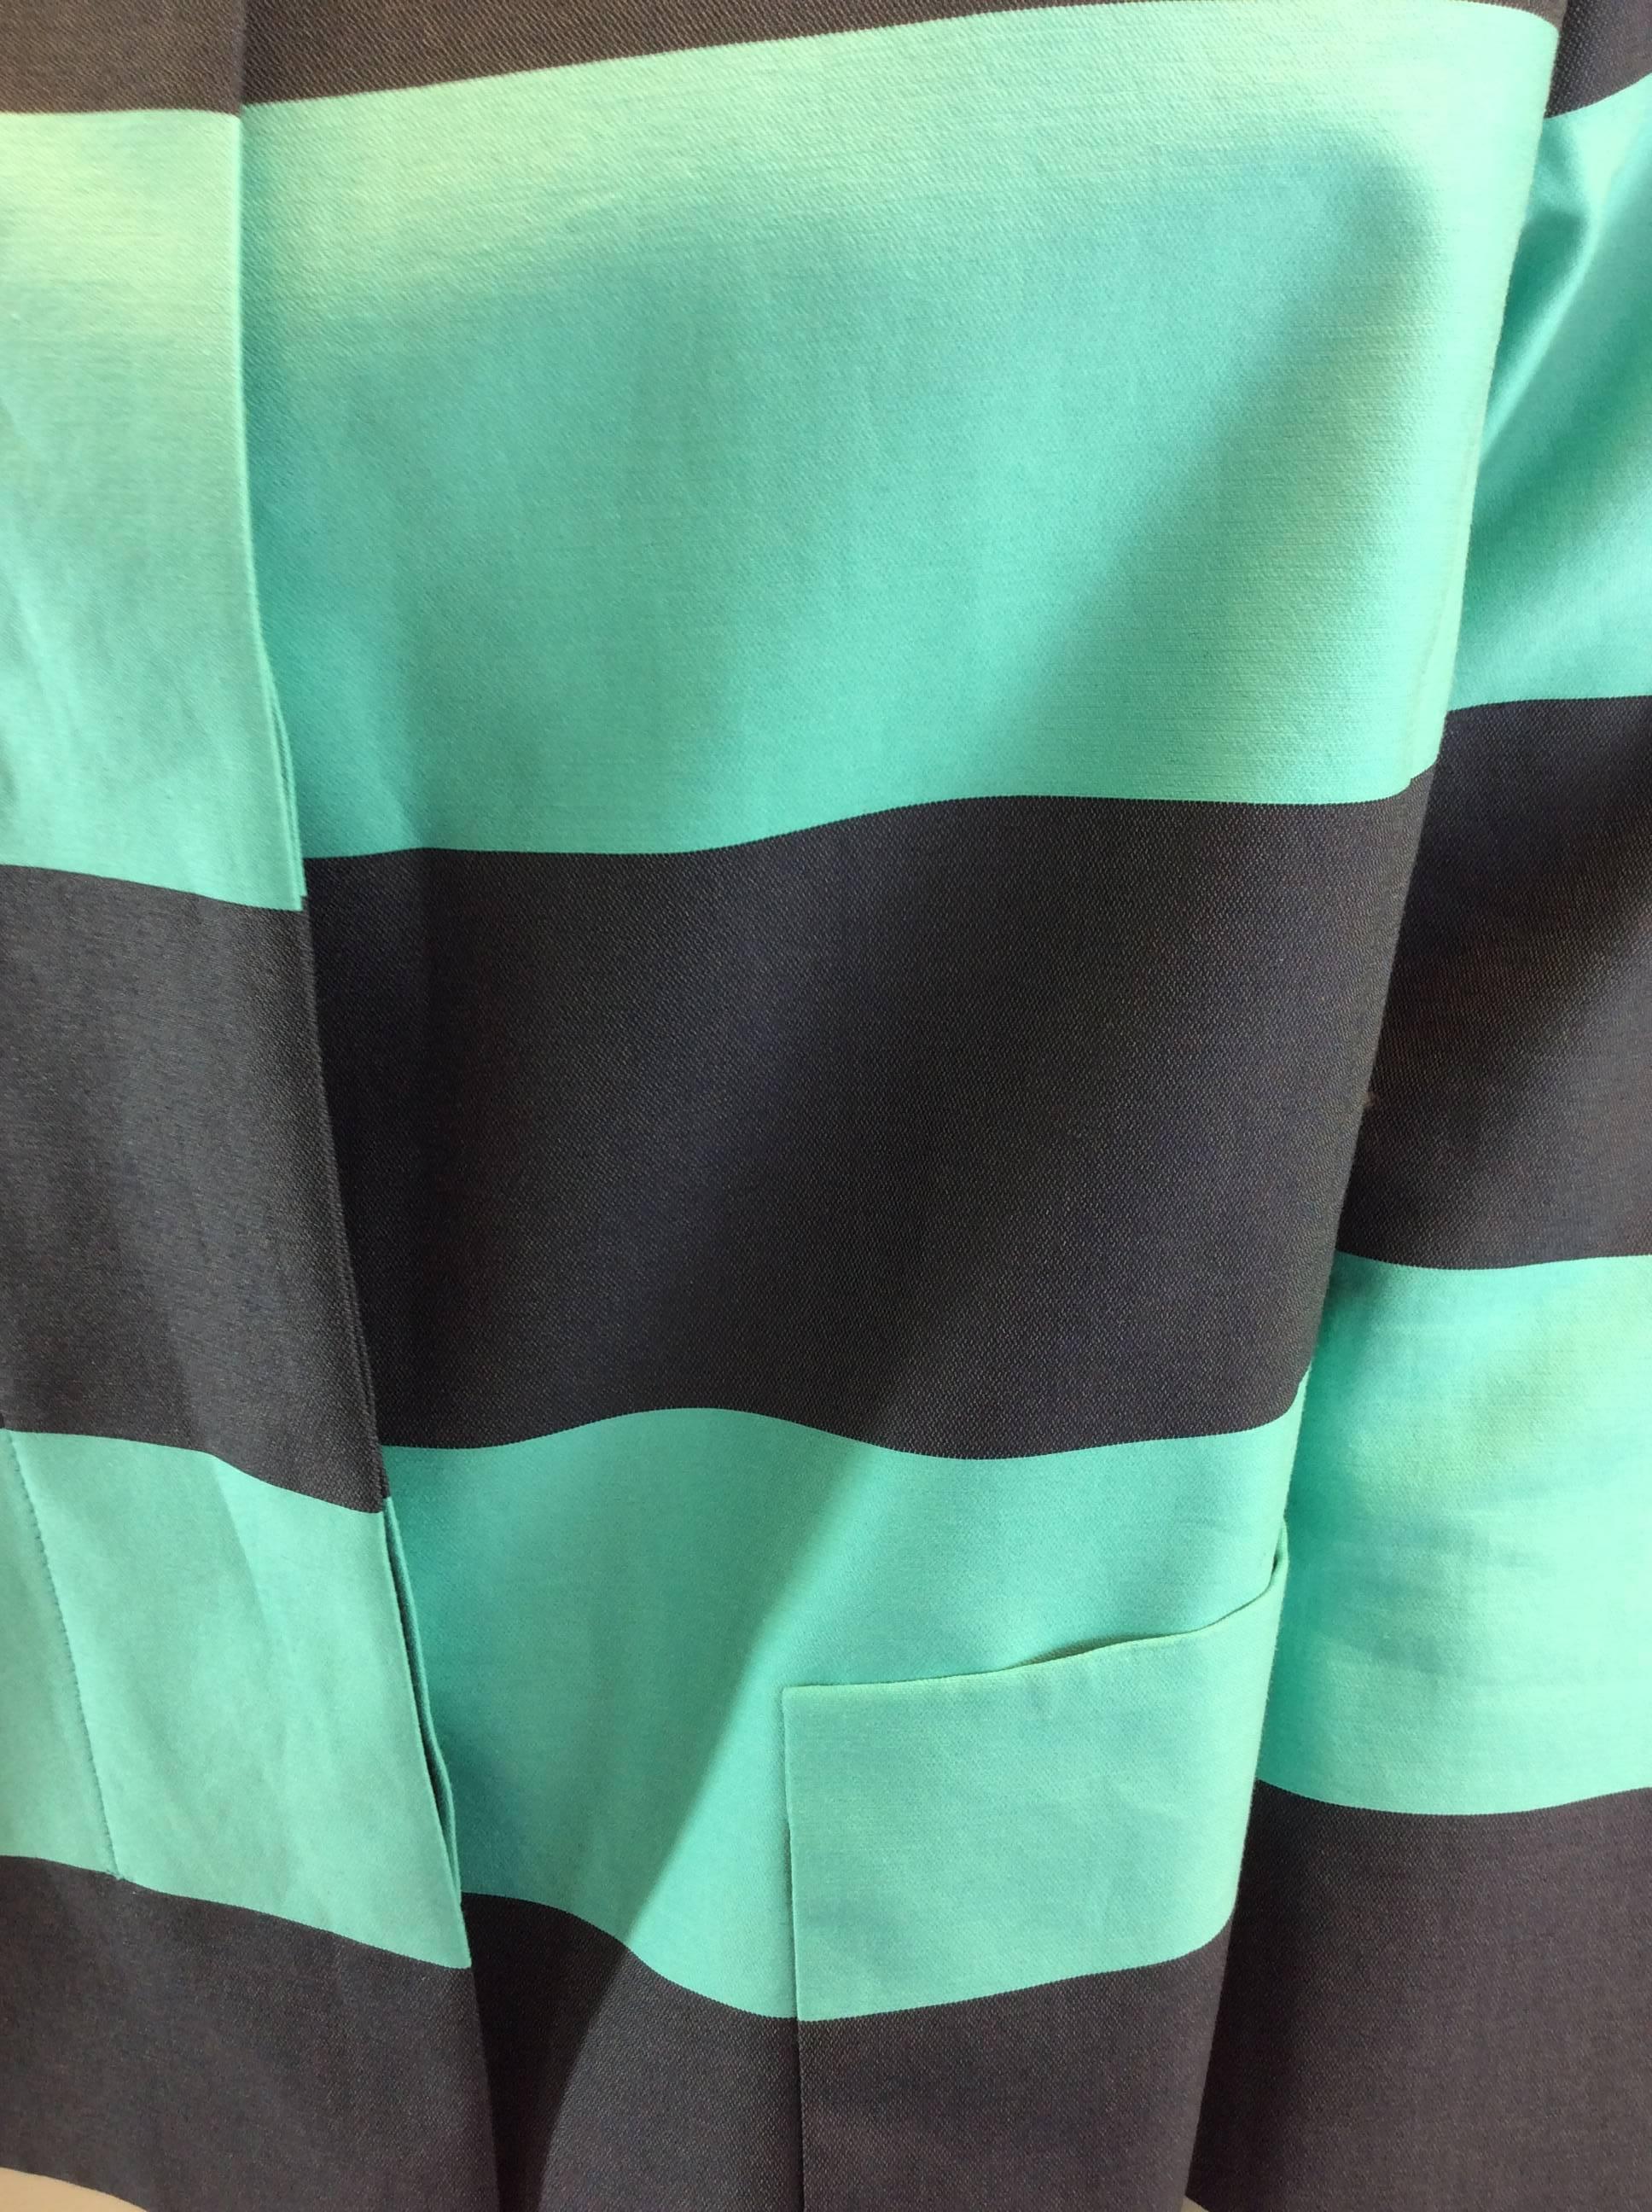 Akris Turquoise Striped Cropped Jacket In Excellent Condition For Sale In Narberth, PA